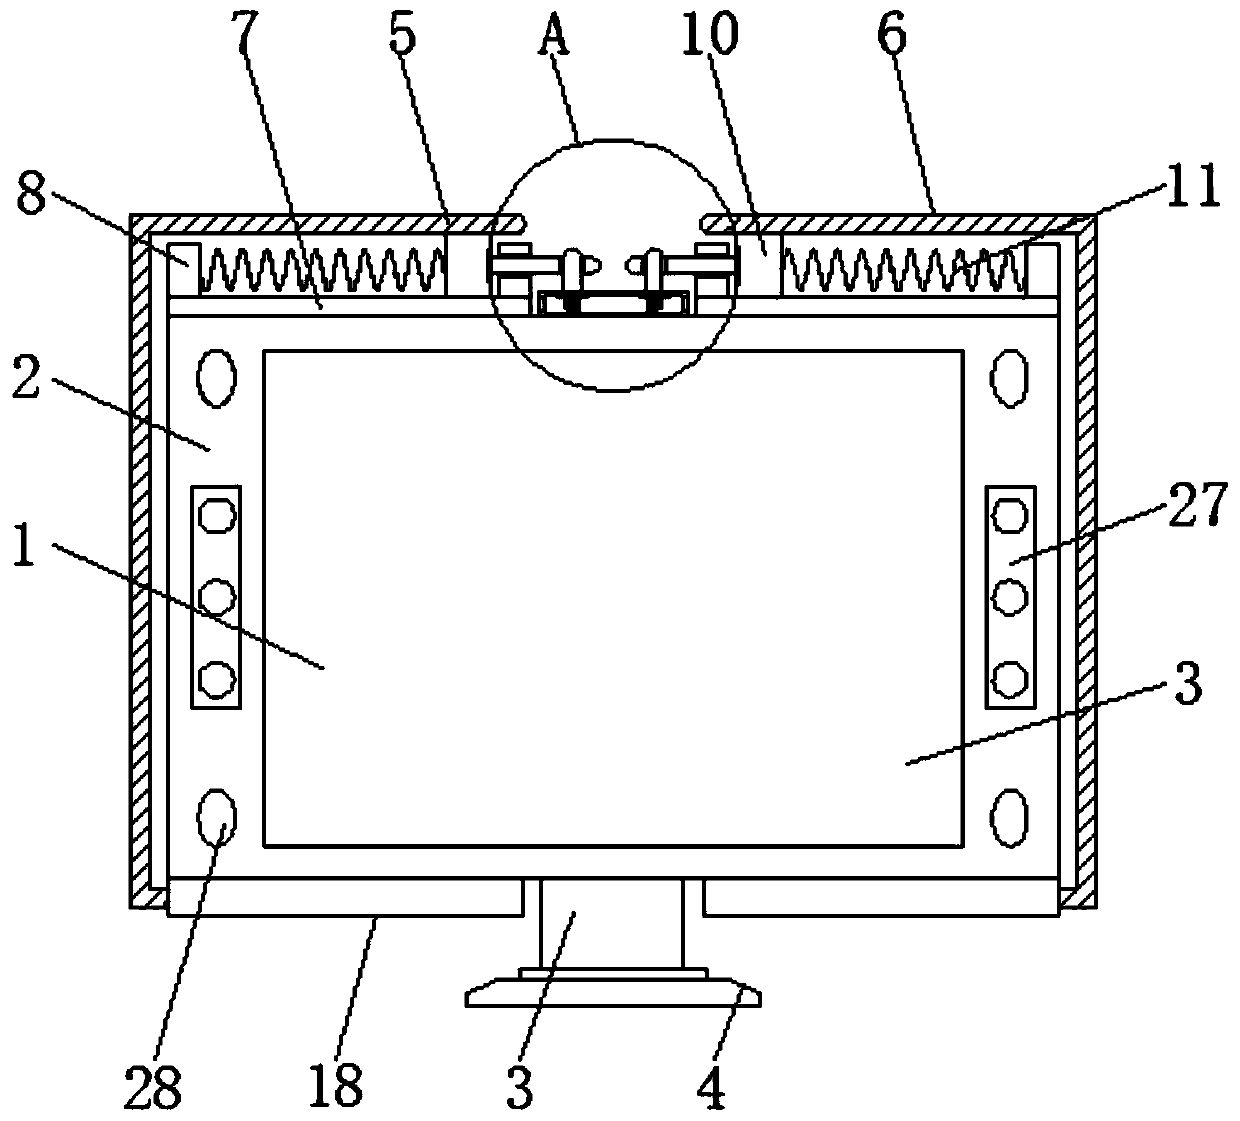 External dustproof device for a computer display screen